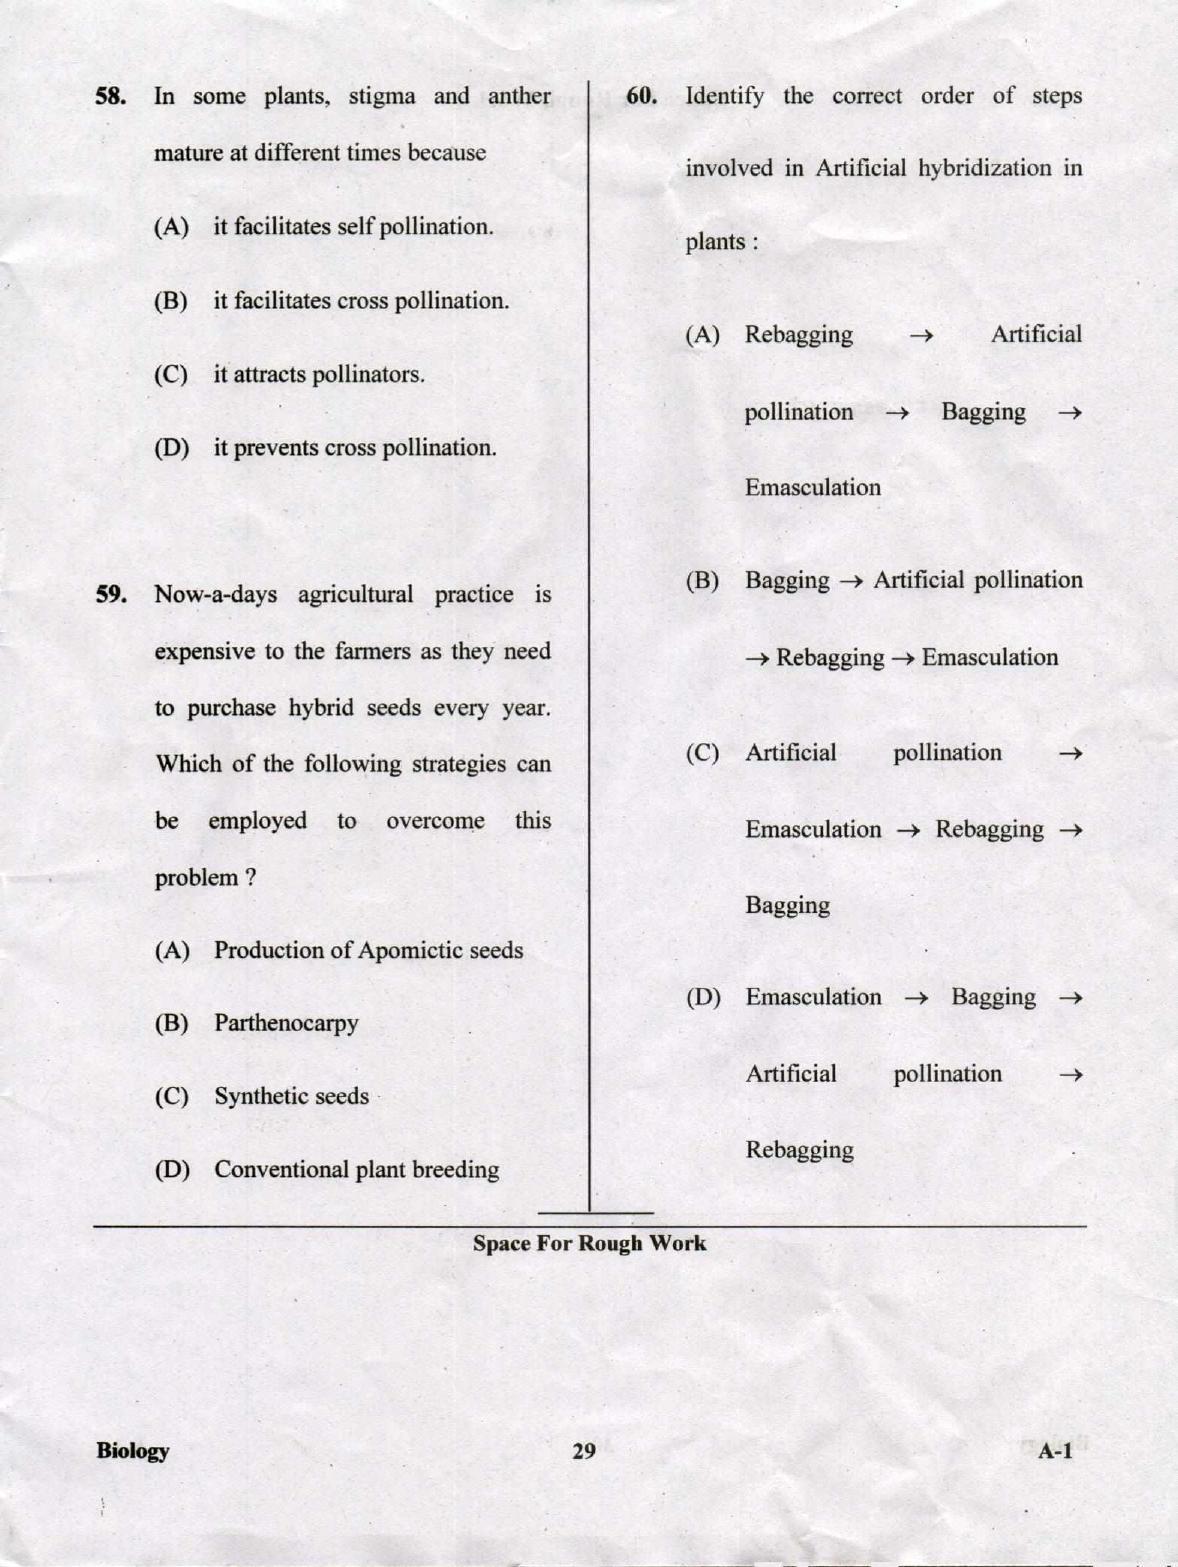 KCET Biology 2019 Question Papers - Page 29